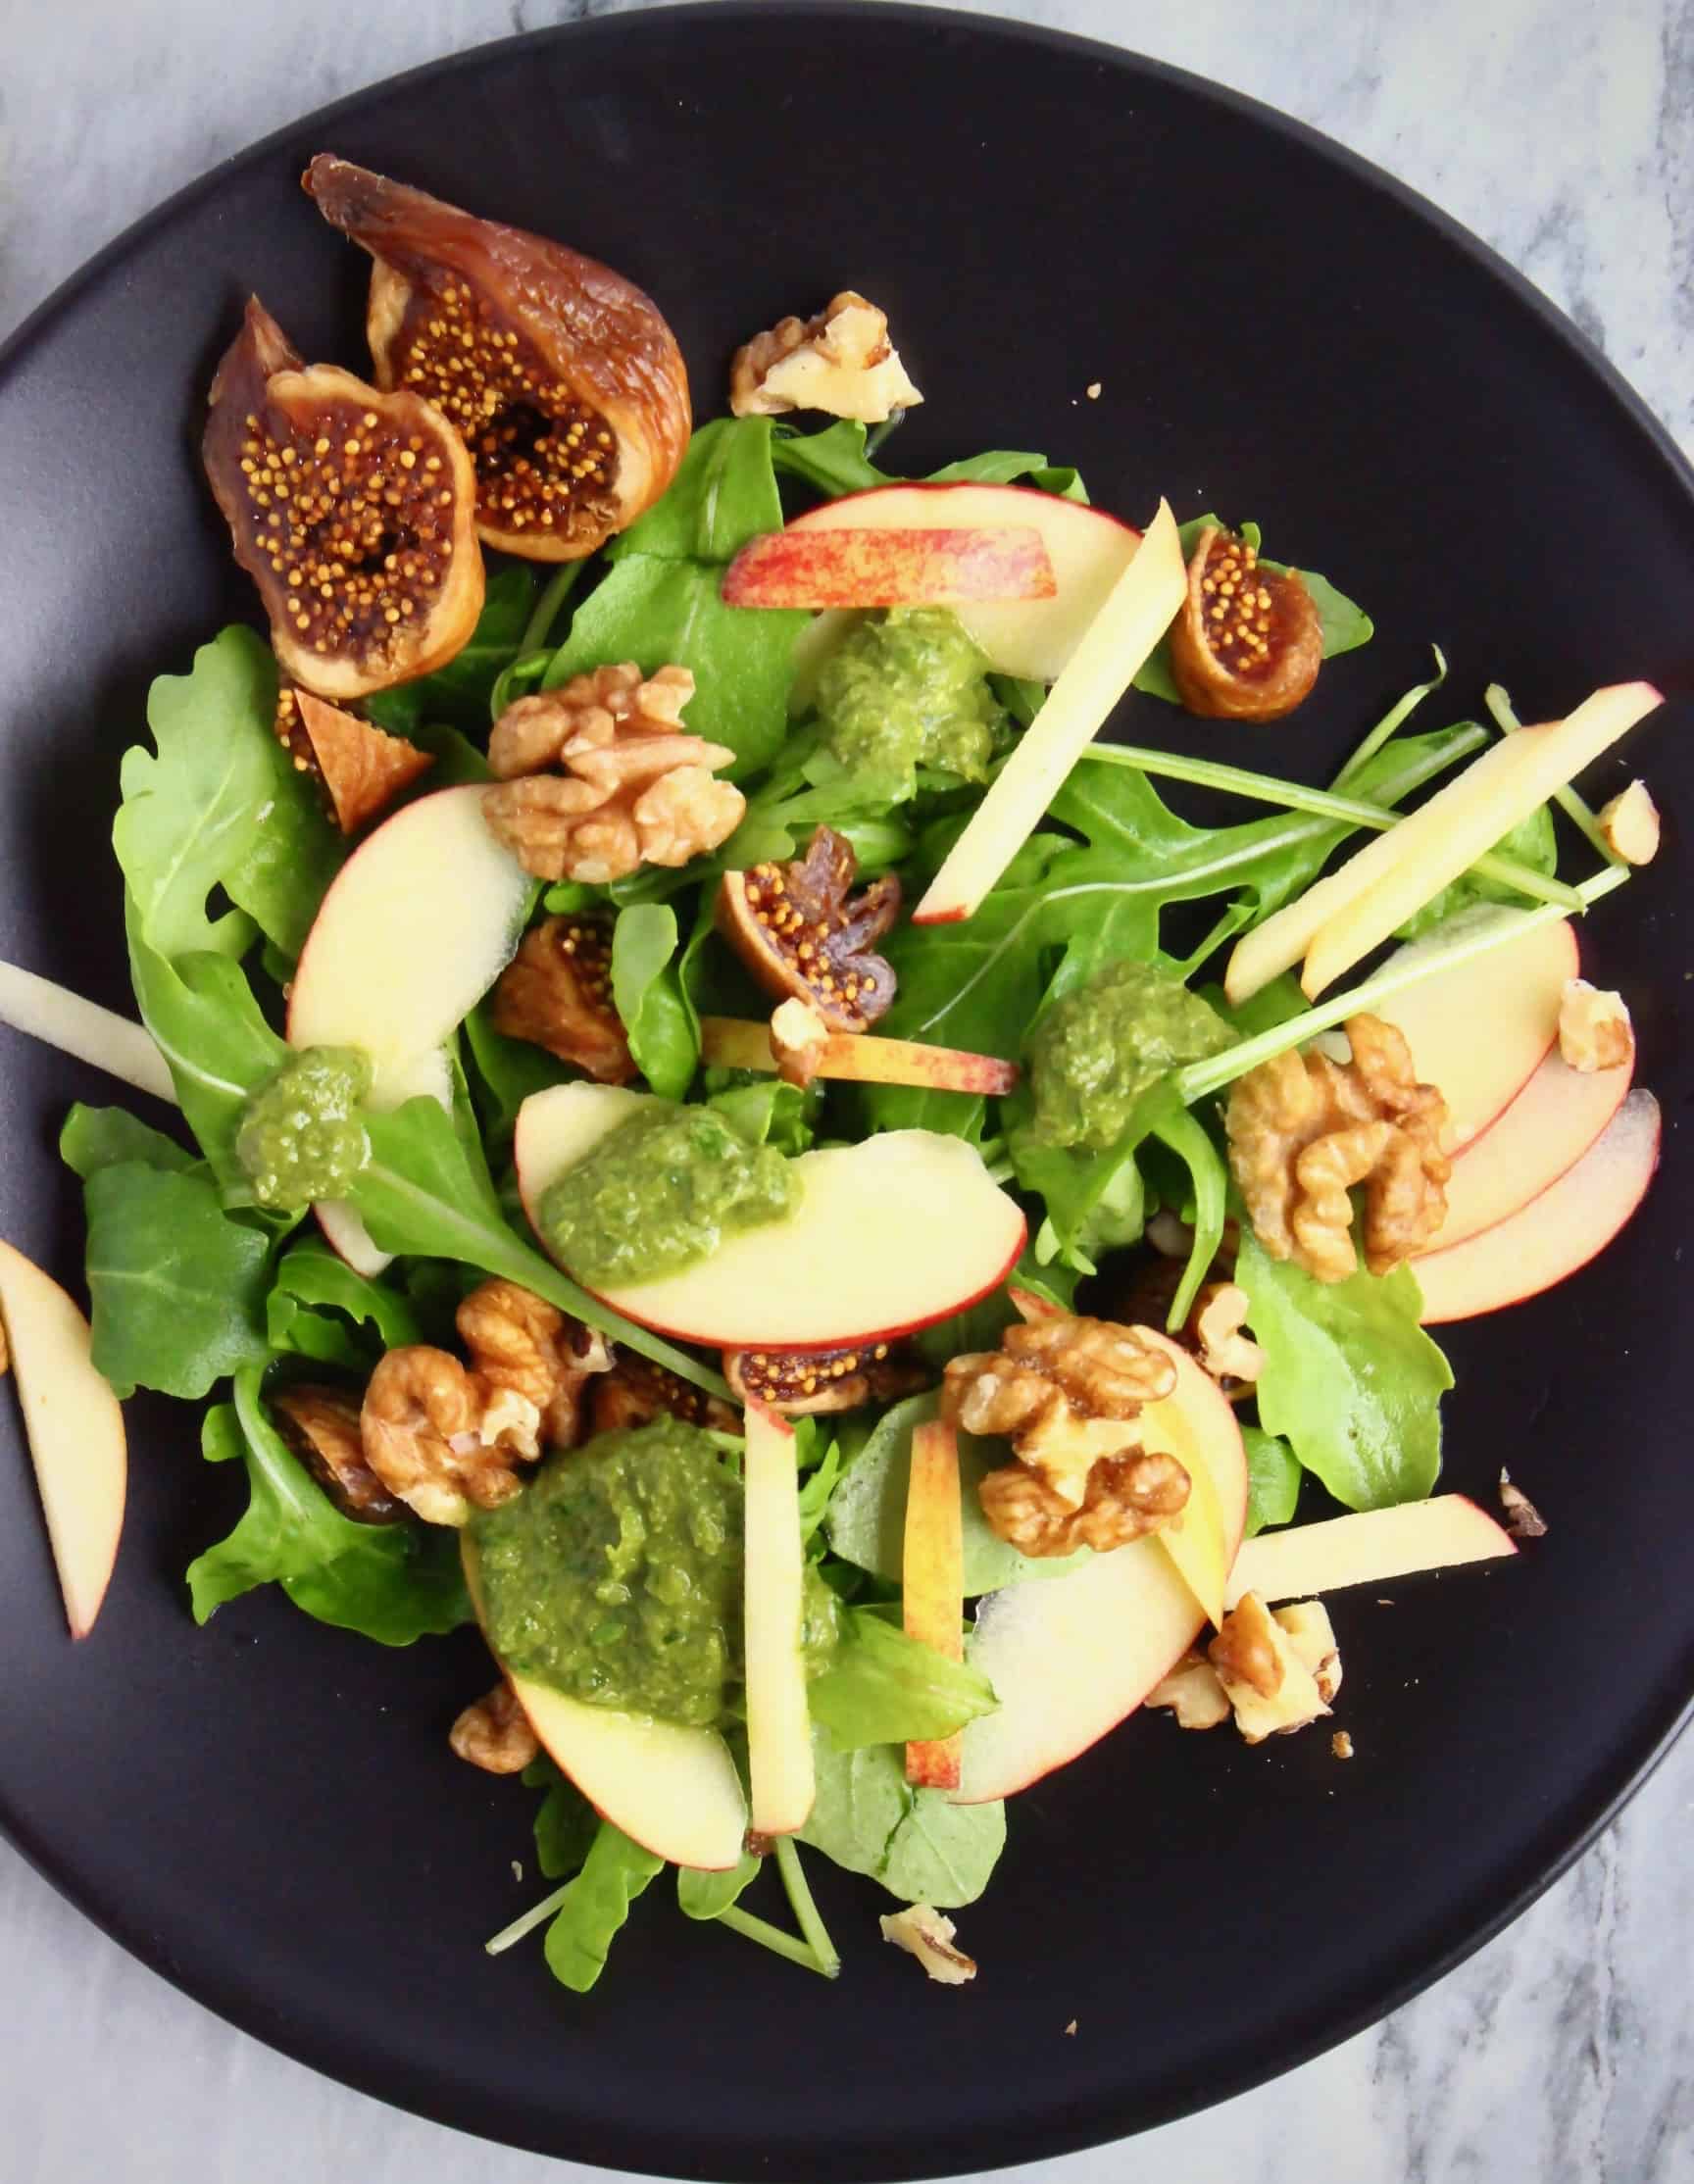 Apple slices, chopped dried figs, rocket and walnuts covered in a green pesto dressing on a black plate 